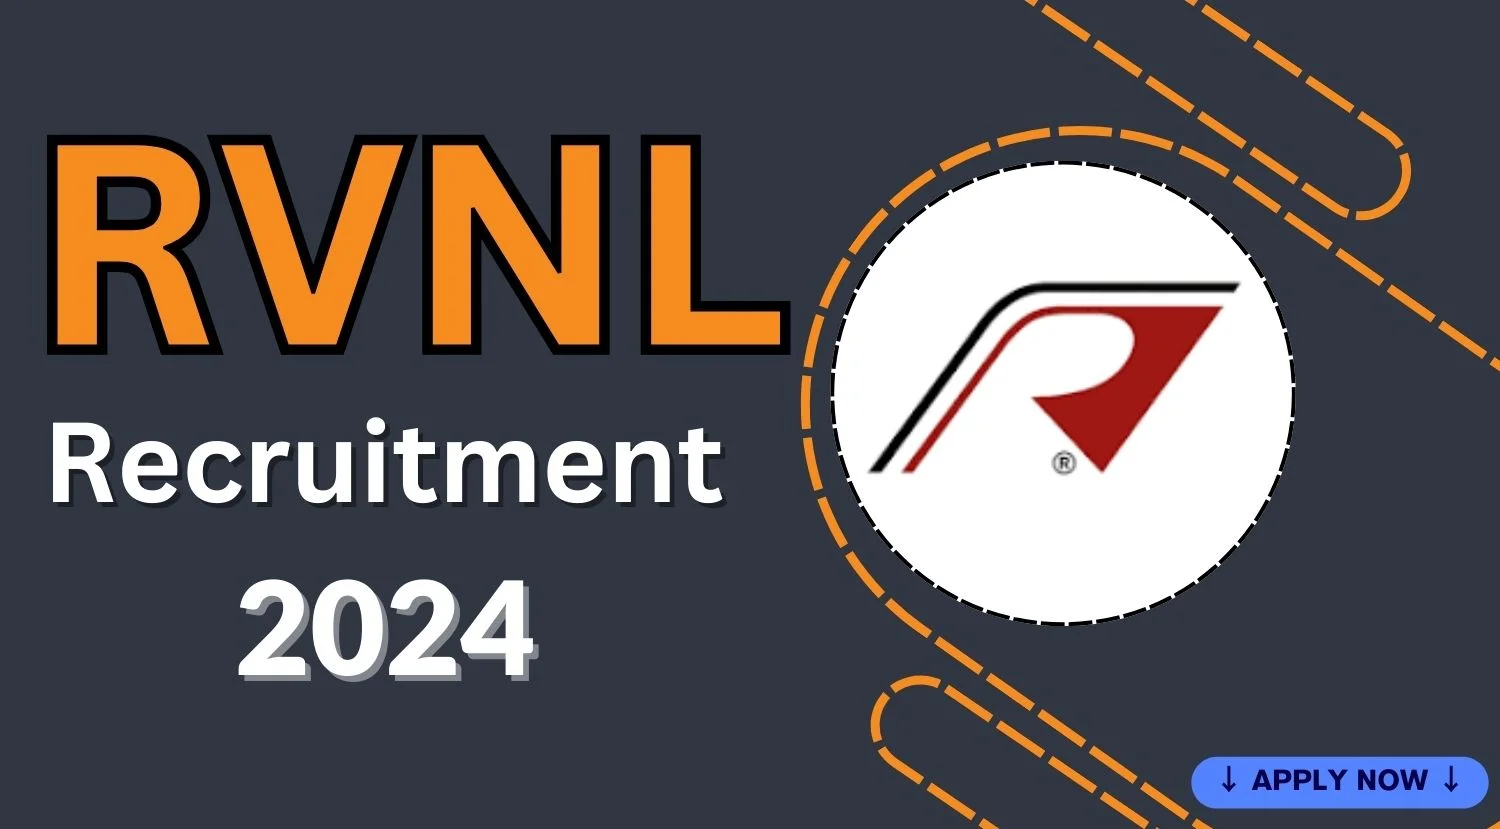 RVNL Recruitment 2024 Notification Out, Check Eligibility Criteria and How to Apply